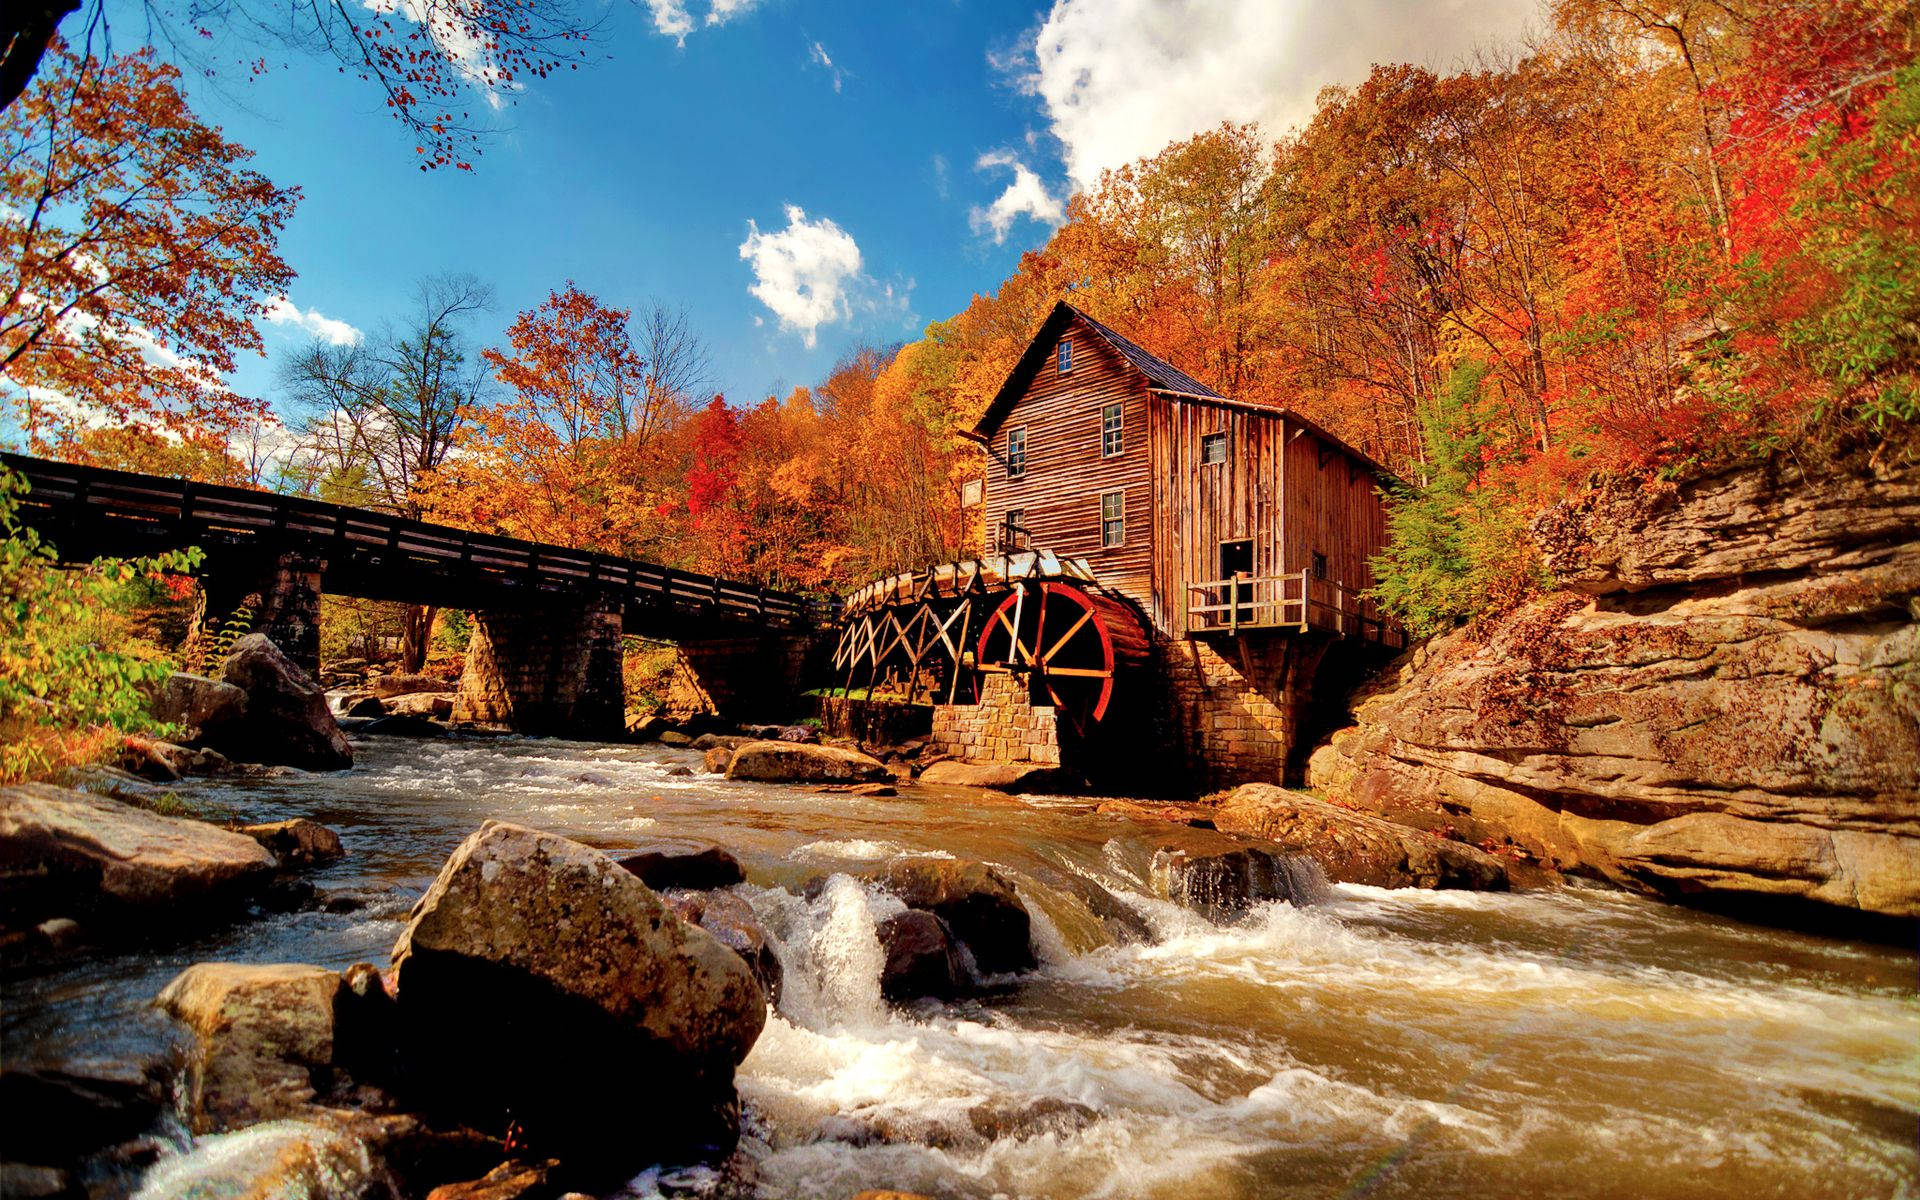 A Scenic Autumn Landscape with River and a Warm House Wallpaper